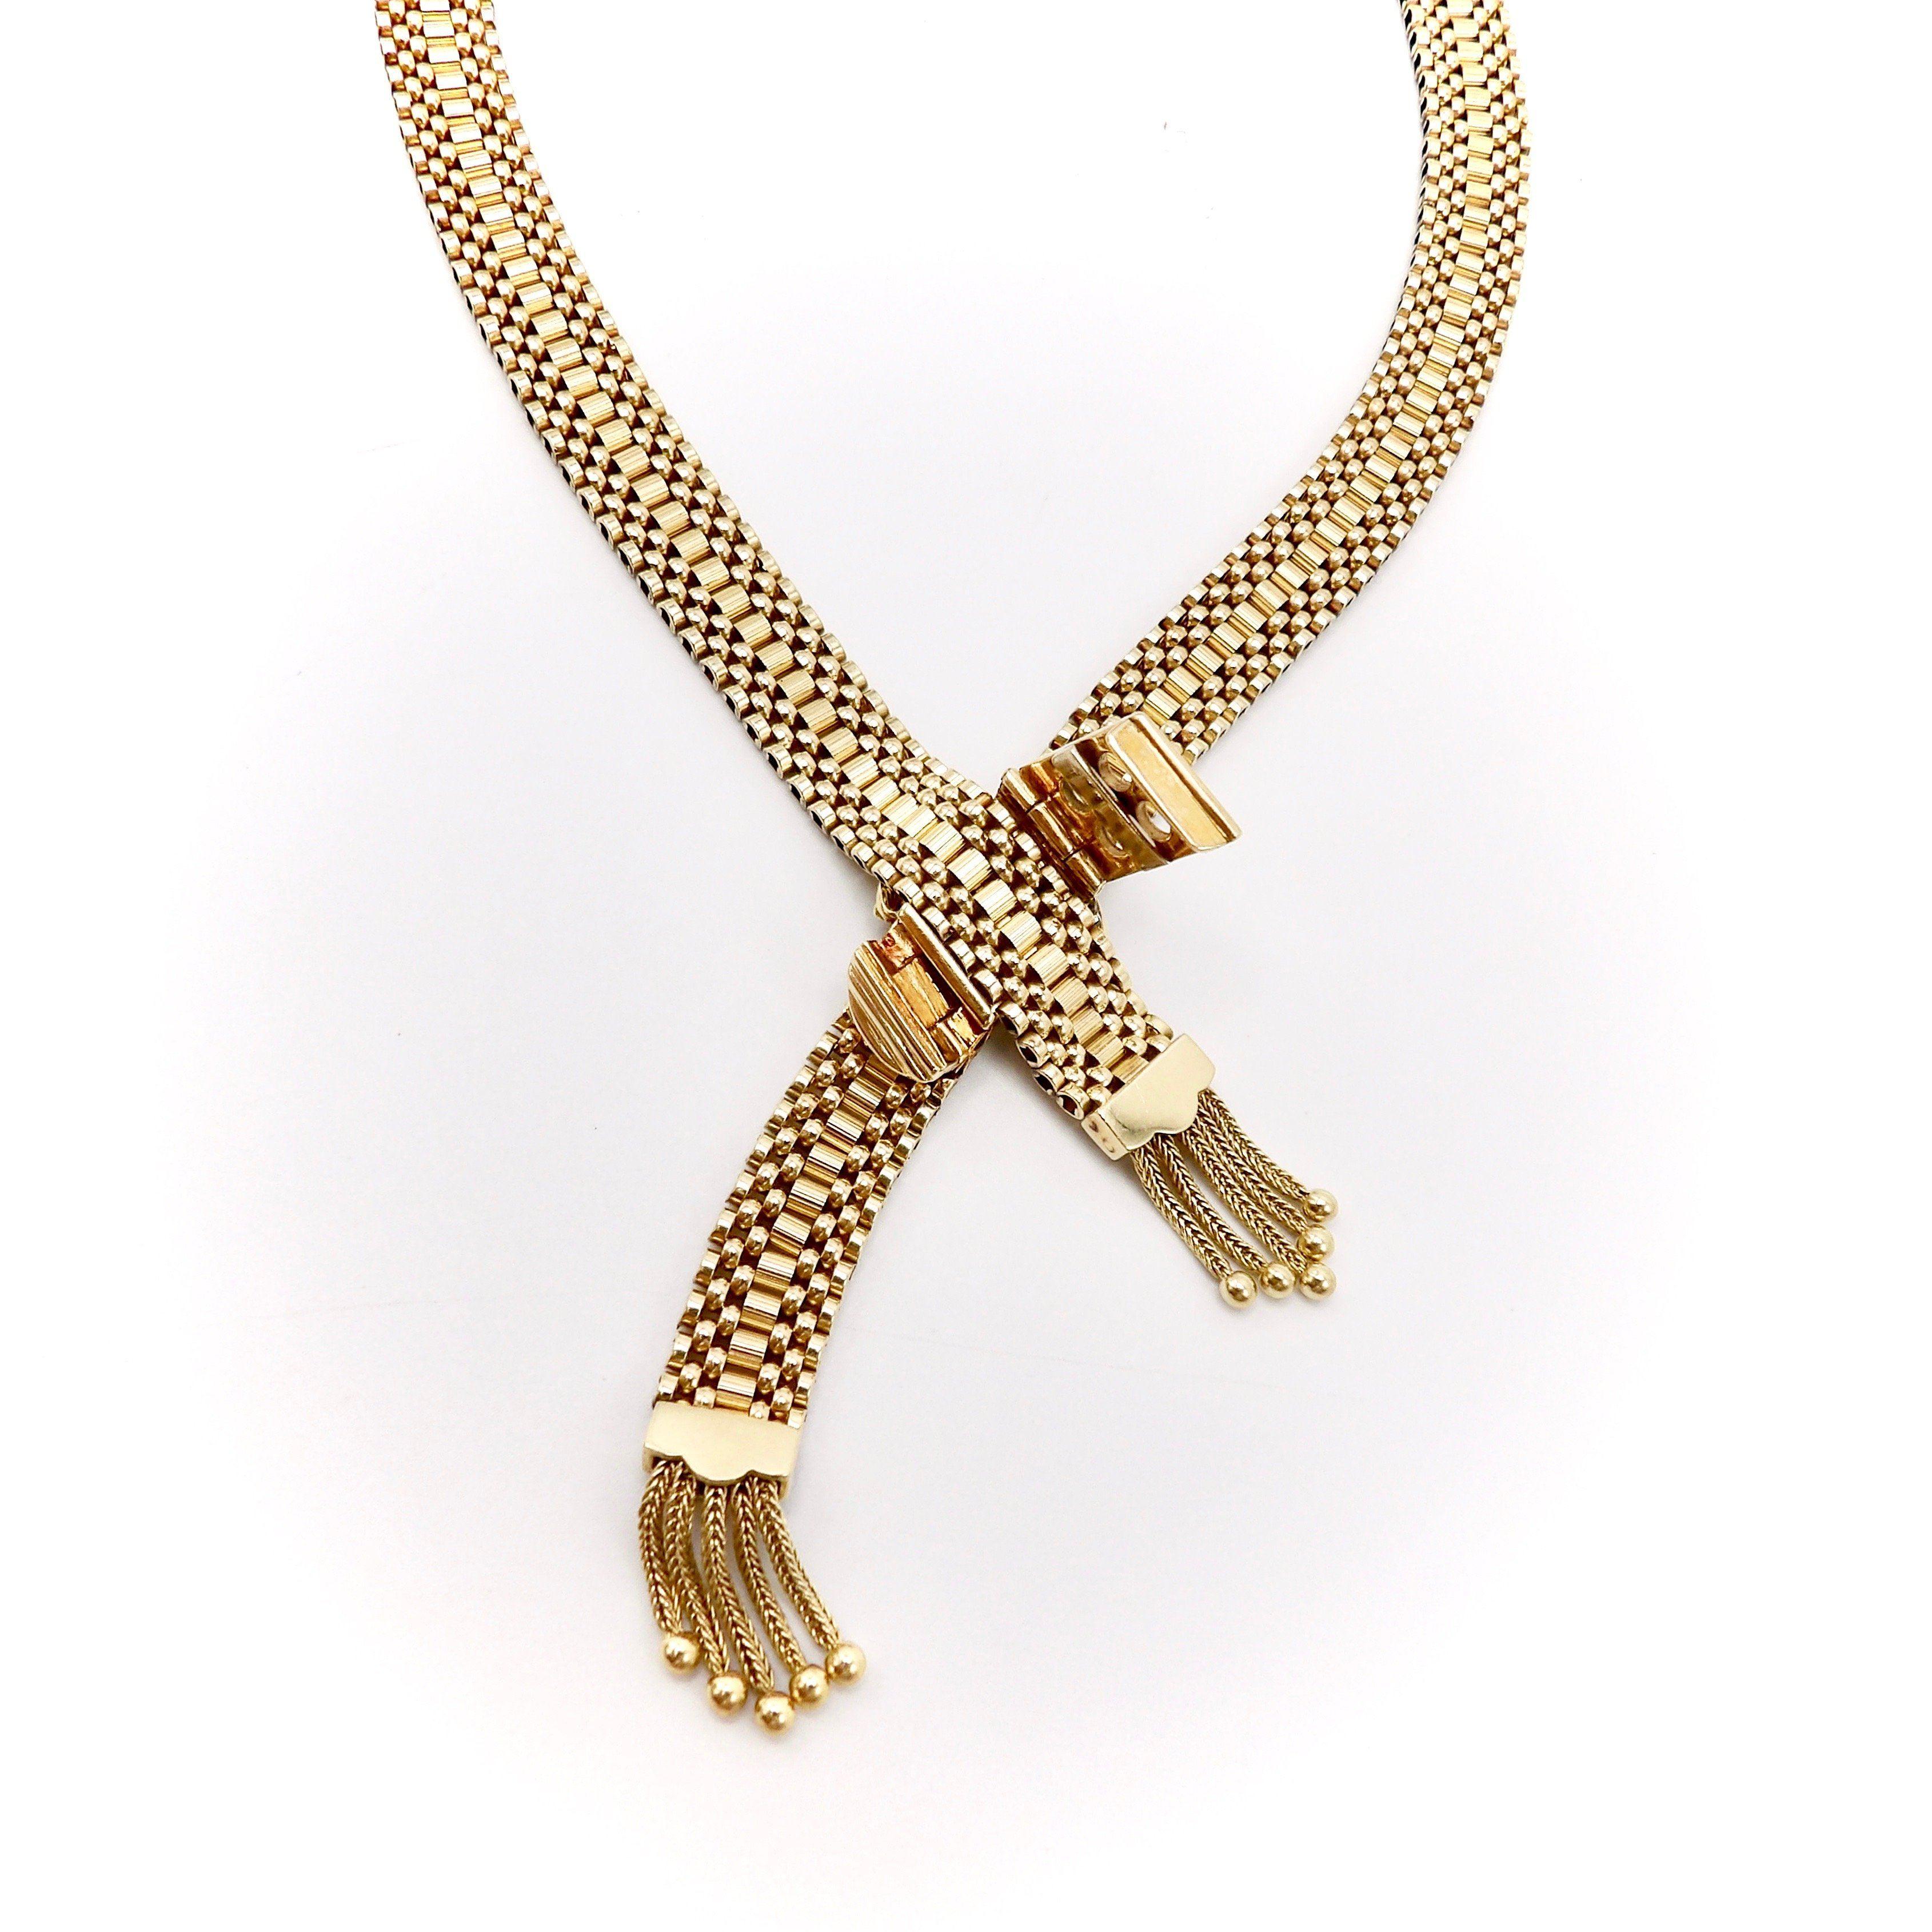 Victorian Revival 14K Woven Gold Necklace with Buckle Clasp and Tassels In Good Condition For Sale In Venice, CA